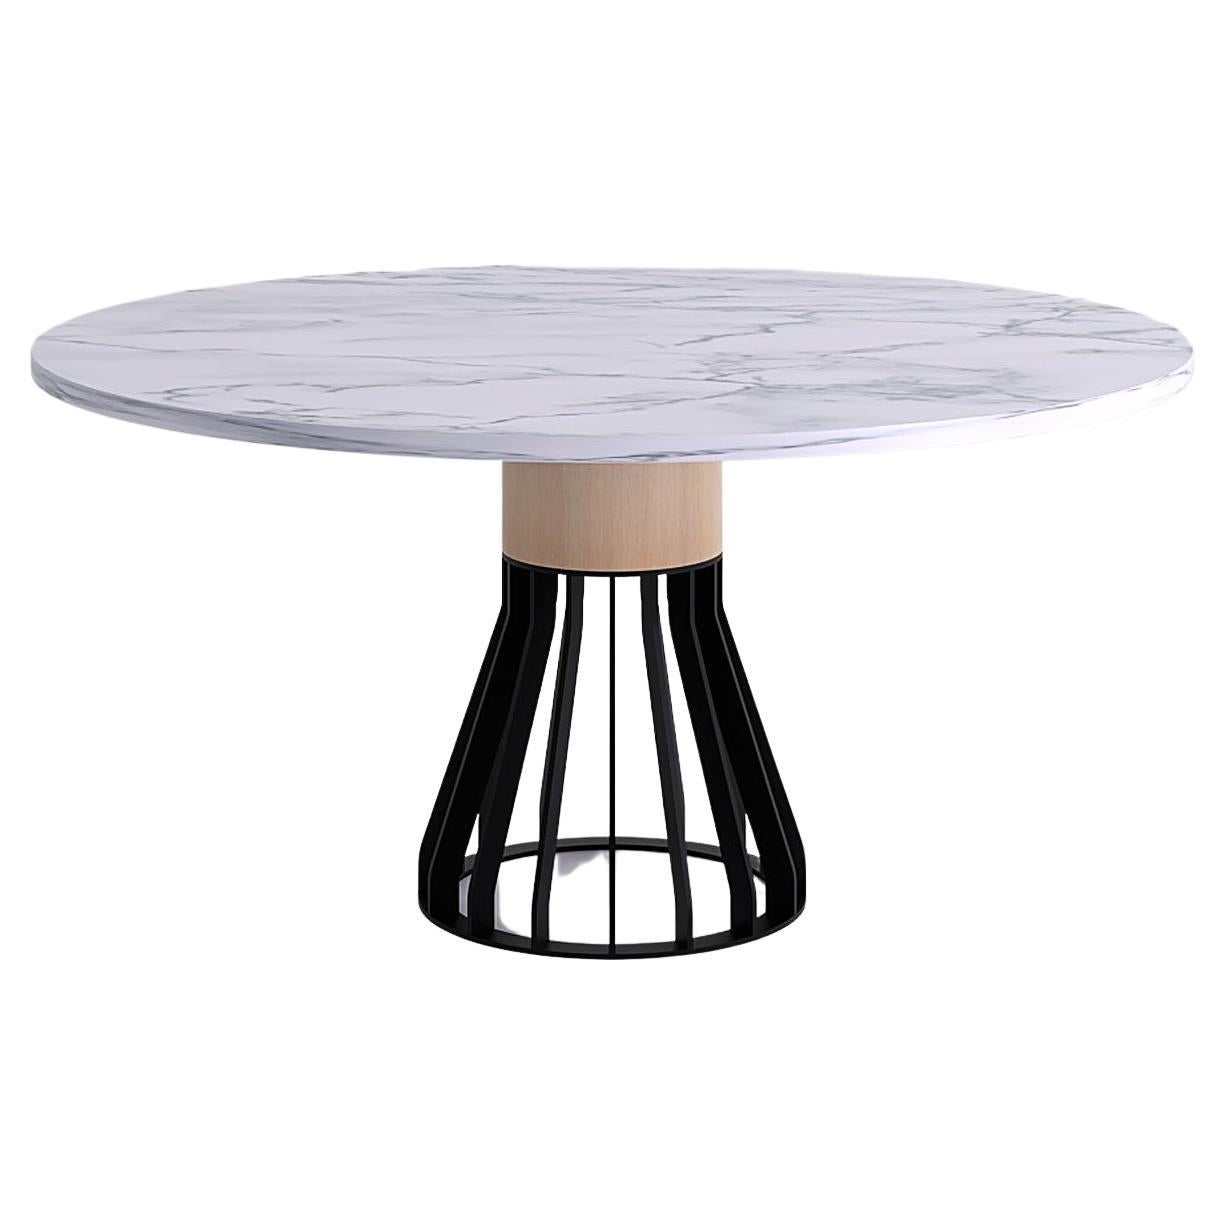 Mewoma Dining Table, Black Legs White Top by Jonah Takagi for La Chance